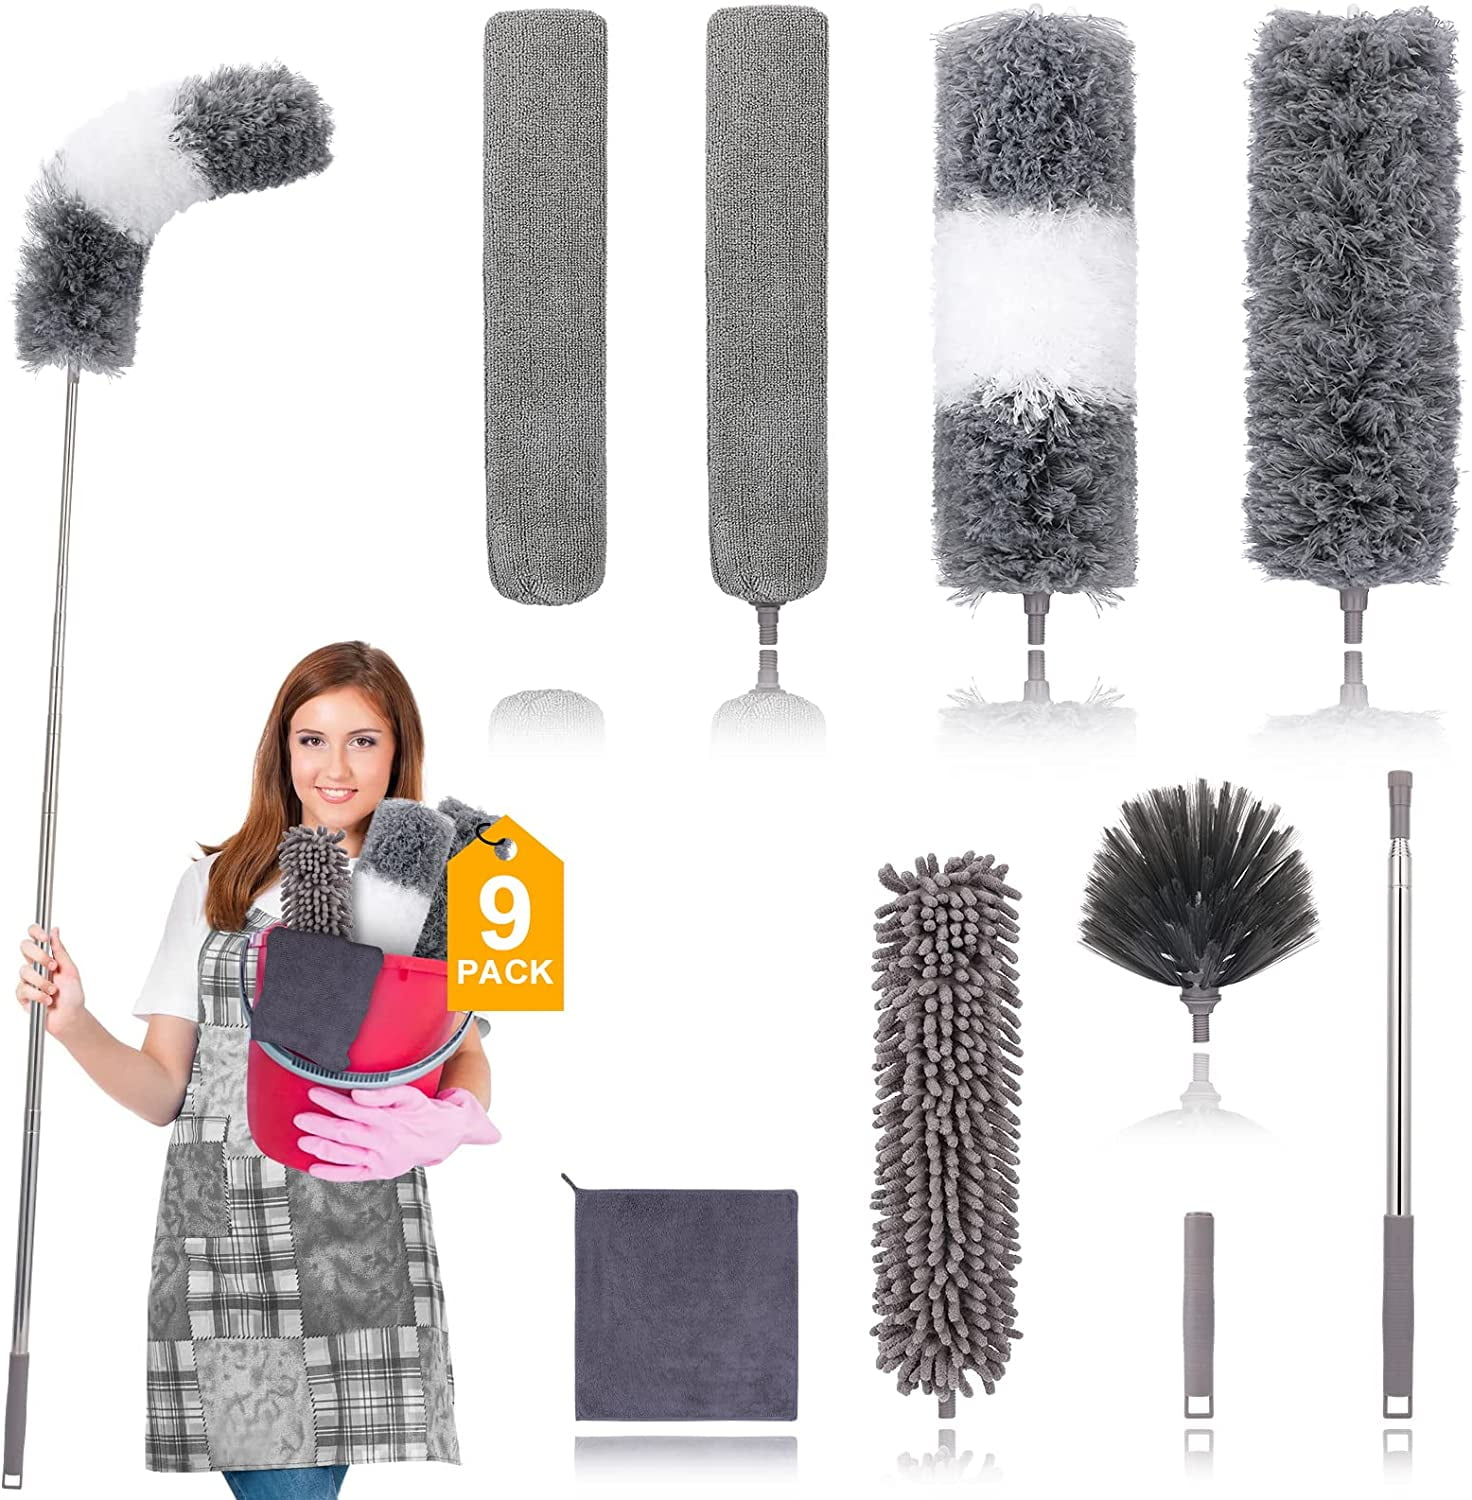 Telescoping Microfiber Duster,1 Stainless Steel Pole & 2 Cleaning Head,Ceiling Fan Duster,Bendable Washable Head,30-100 inches,for Cleaning Roof Corners,Furniture,Car,Skylight Blinds Cobwebs 